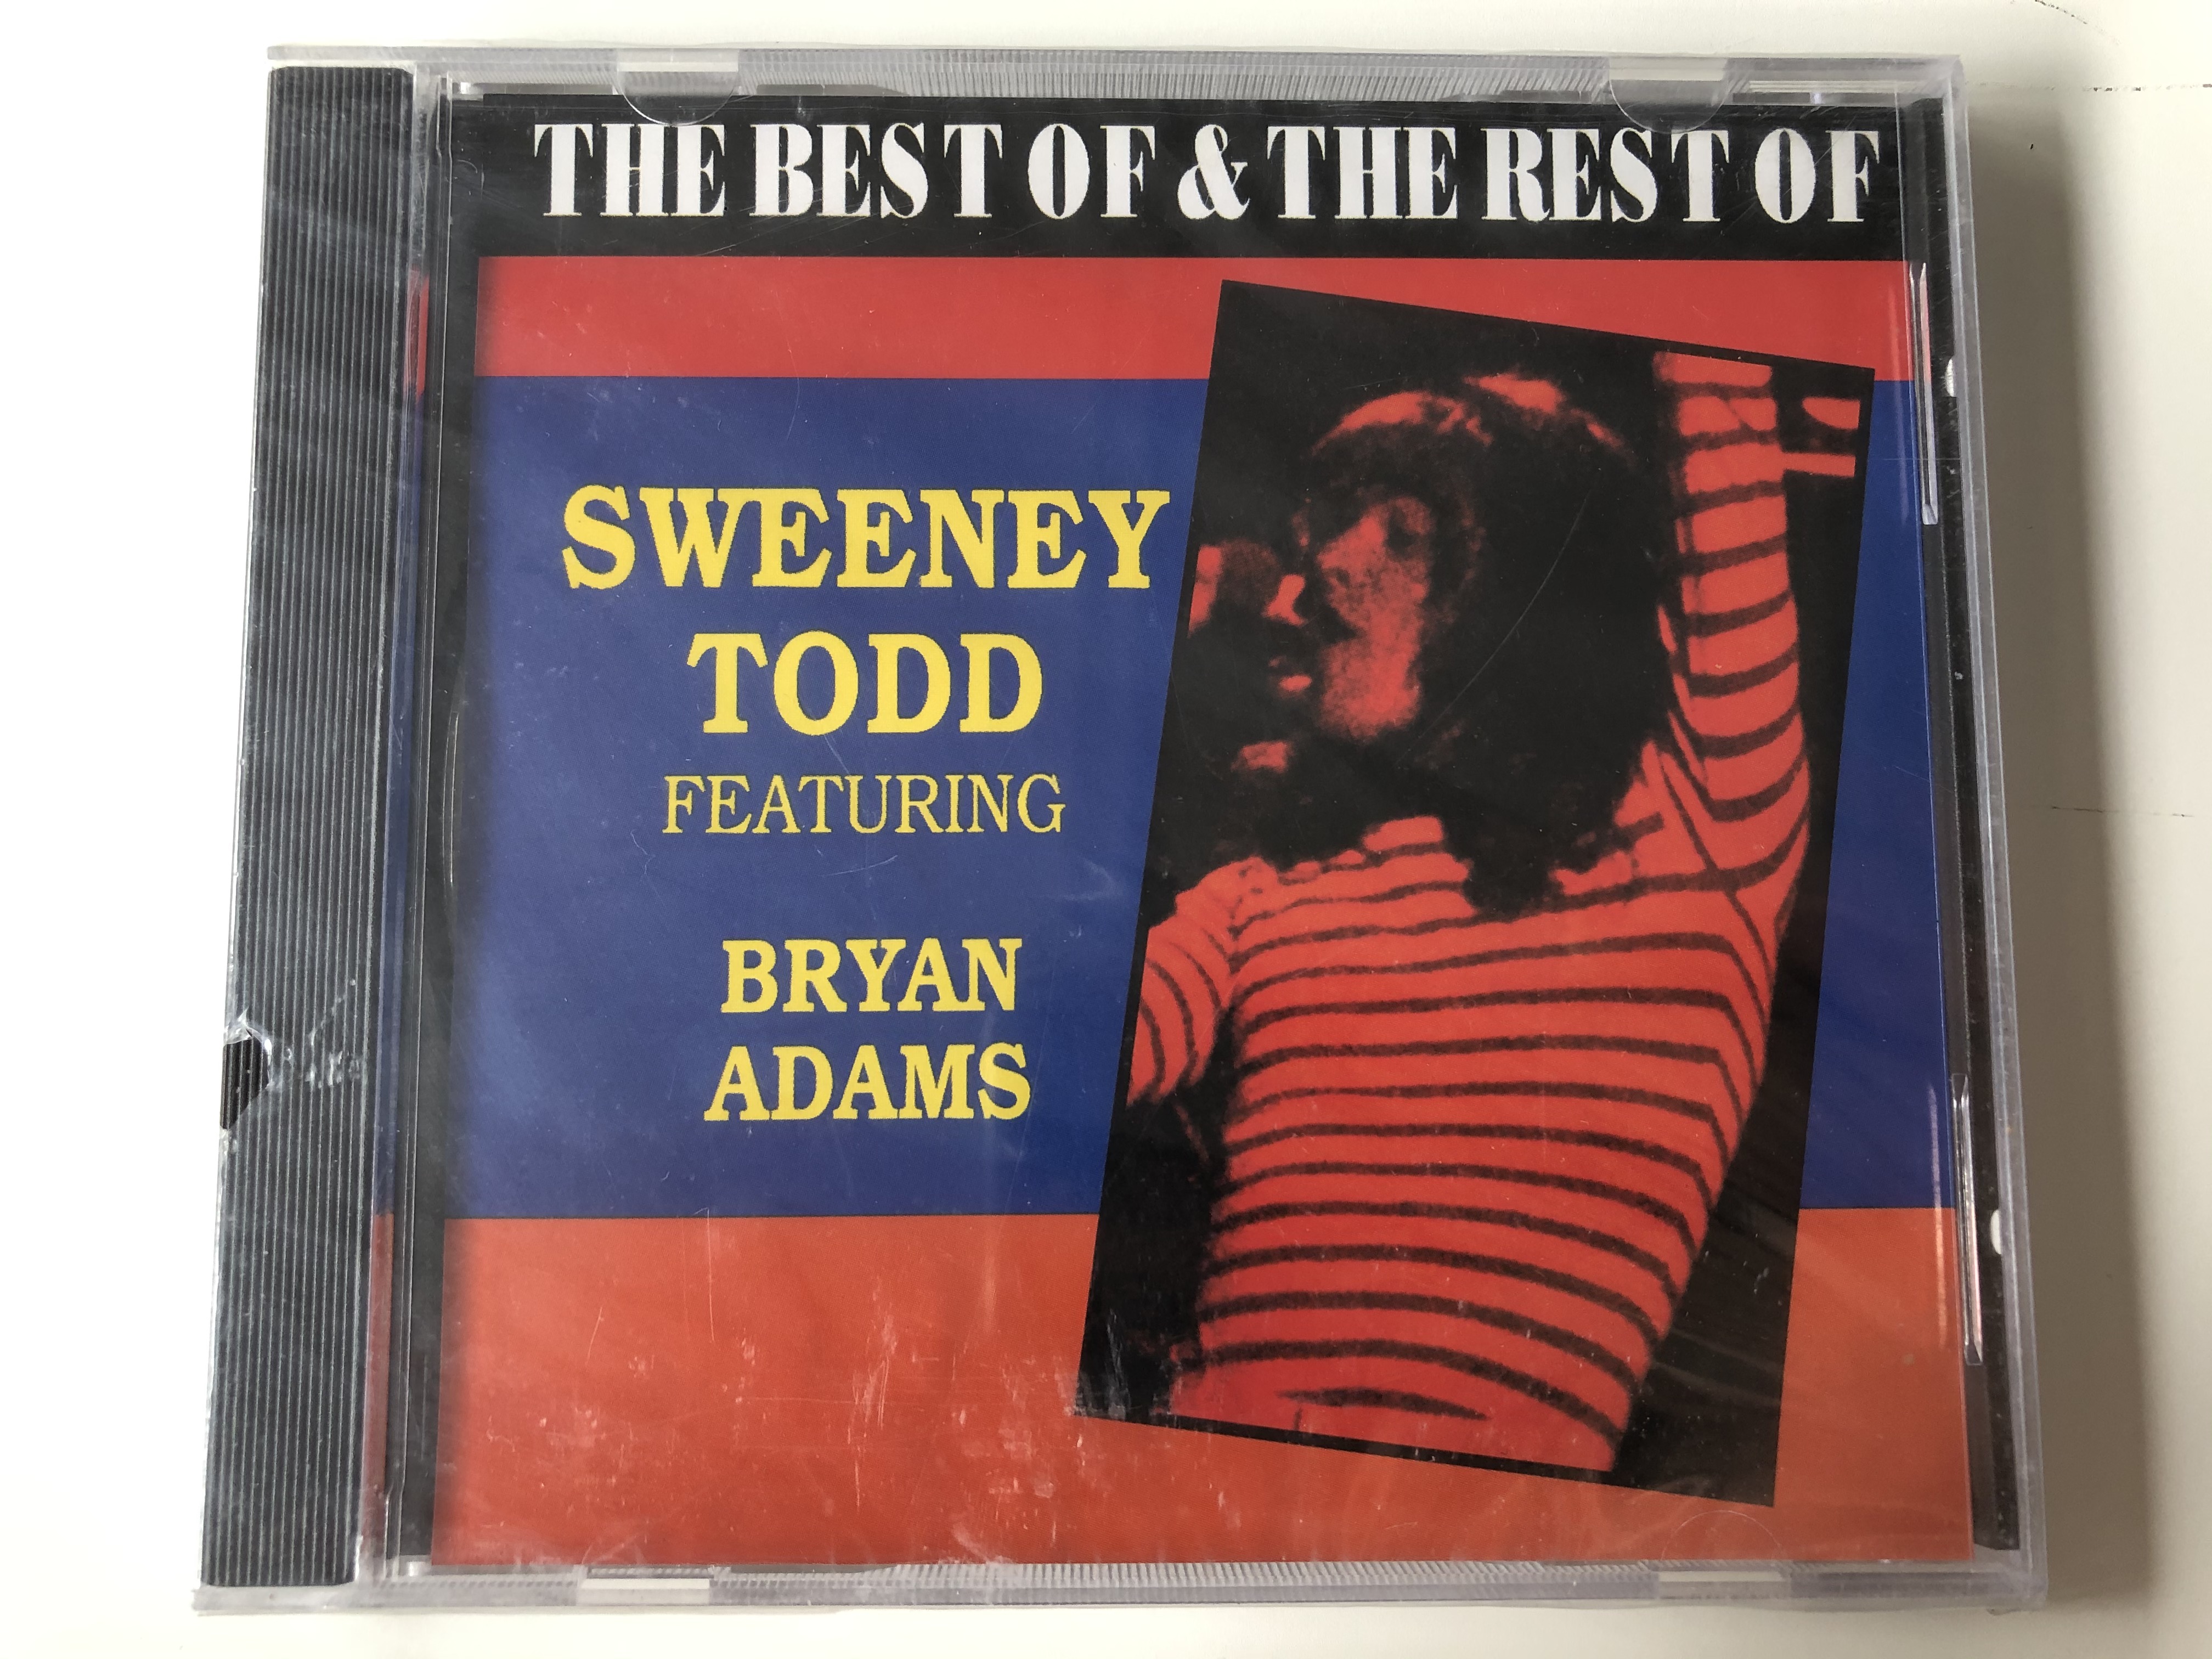 the-best-of-the-rest-of-sweeney-todd-featuring-bryan-adams-action-replay-records-audio-cd-1994-cdar1042-1-.jpg